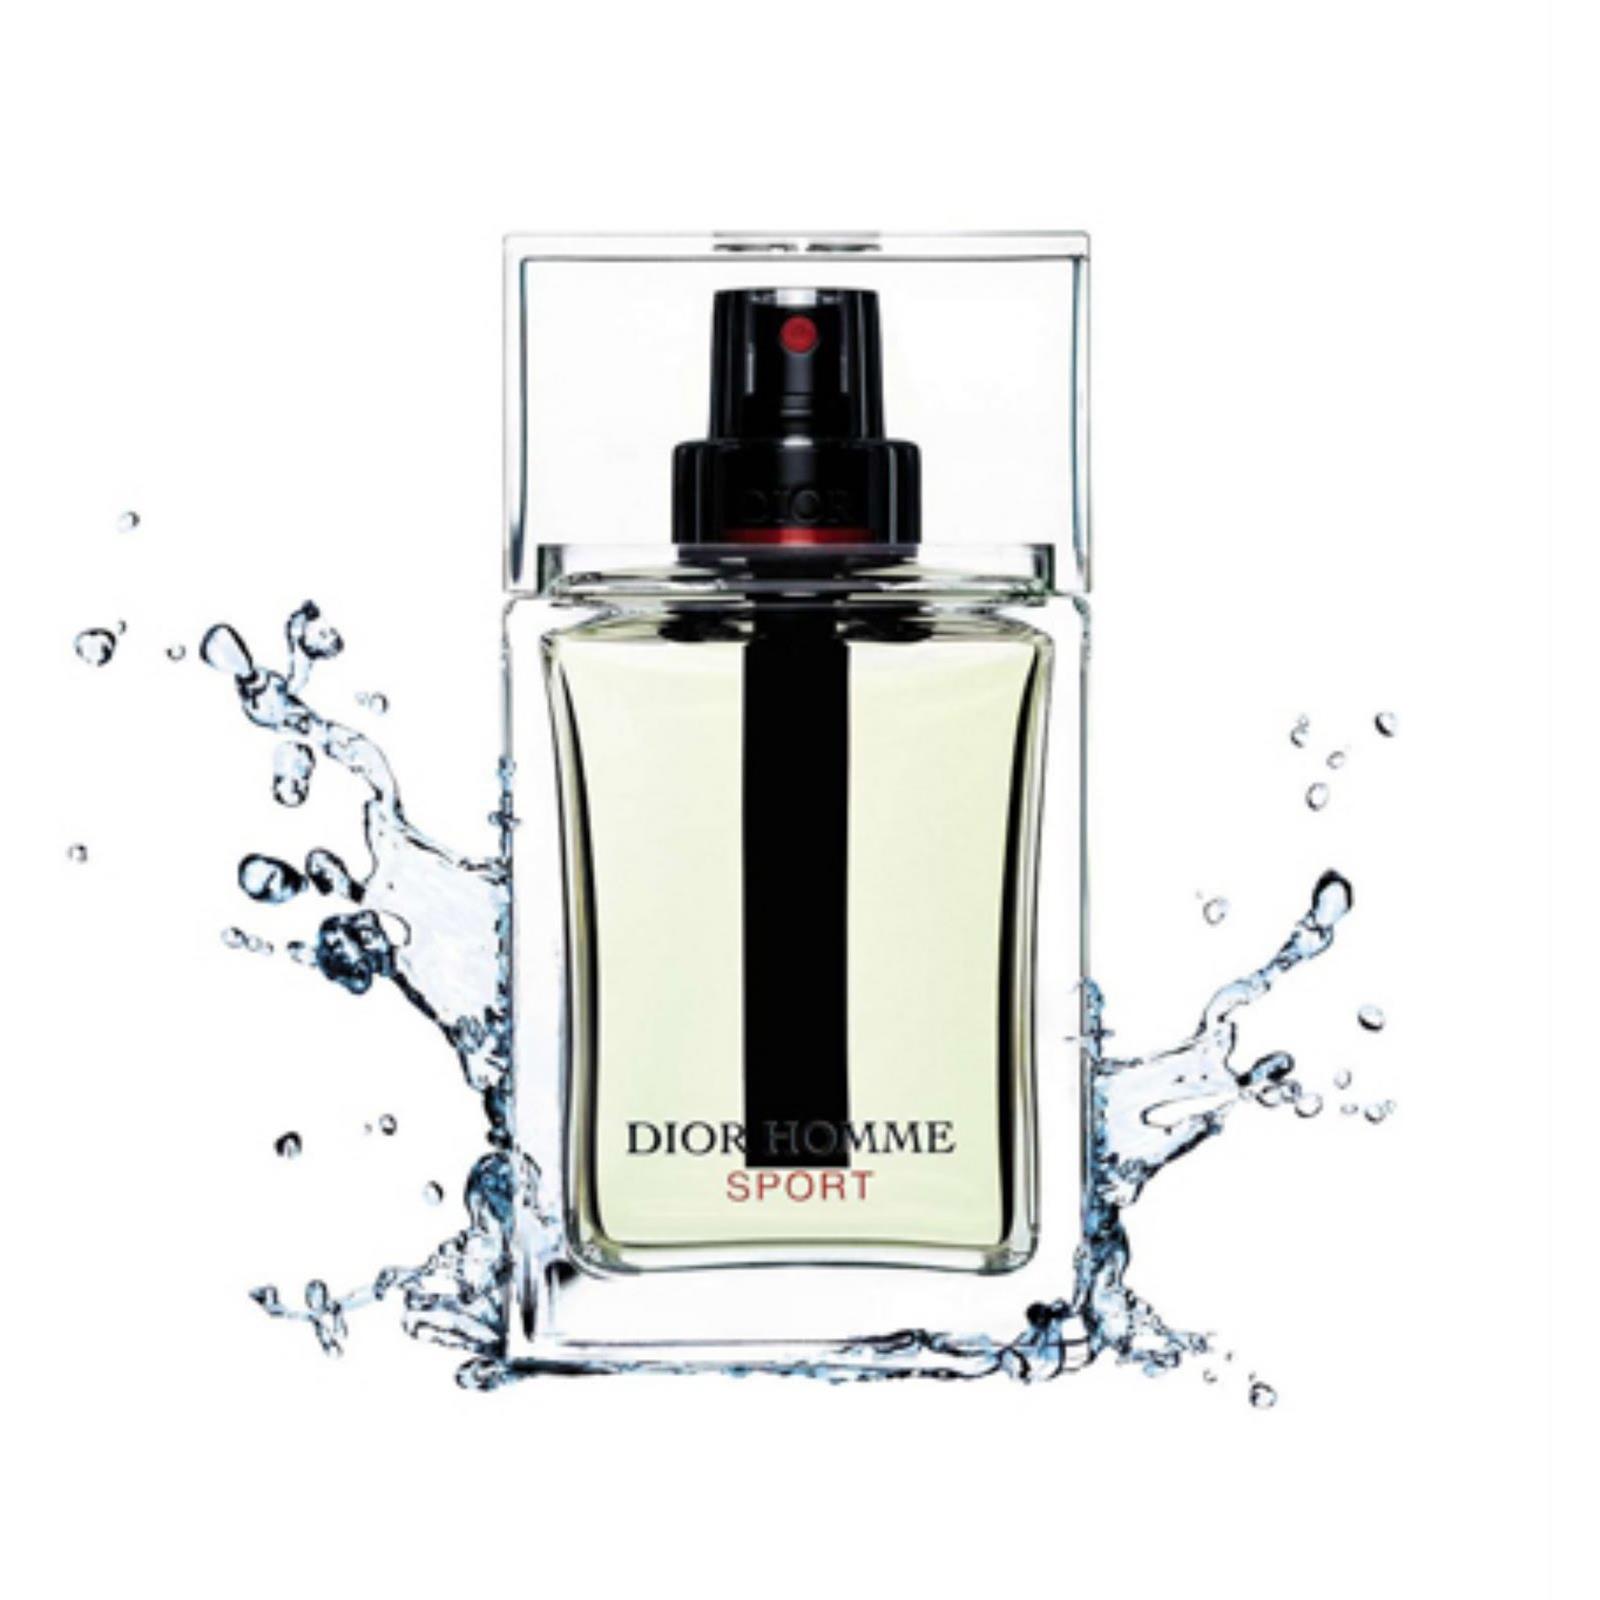 REVIEW Dior Homme Sport EDT